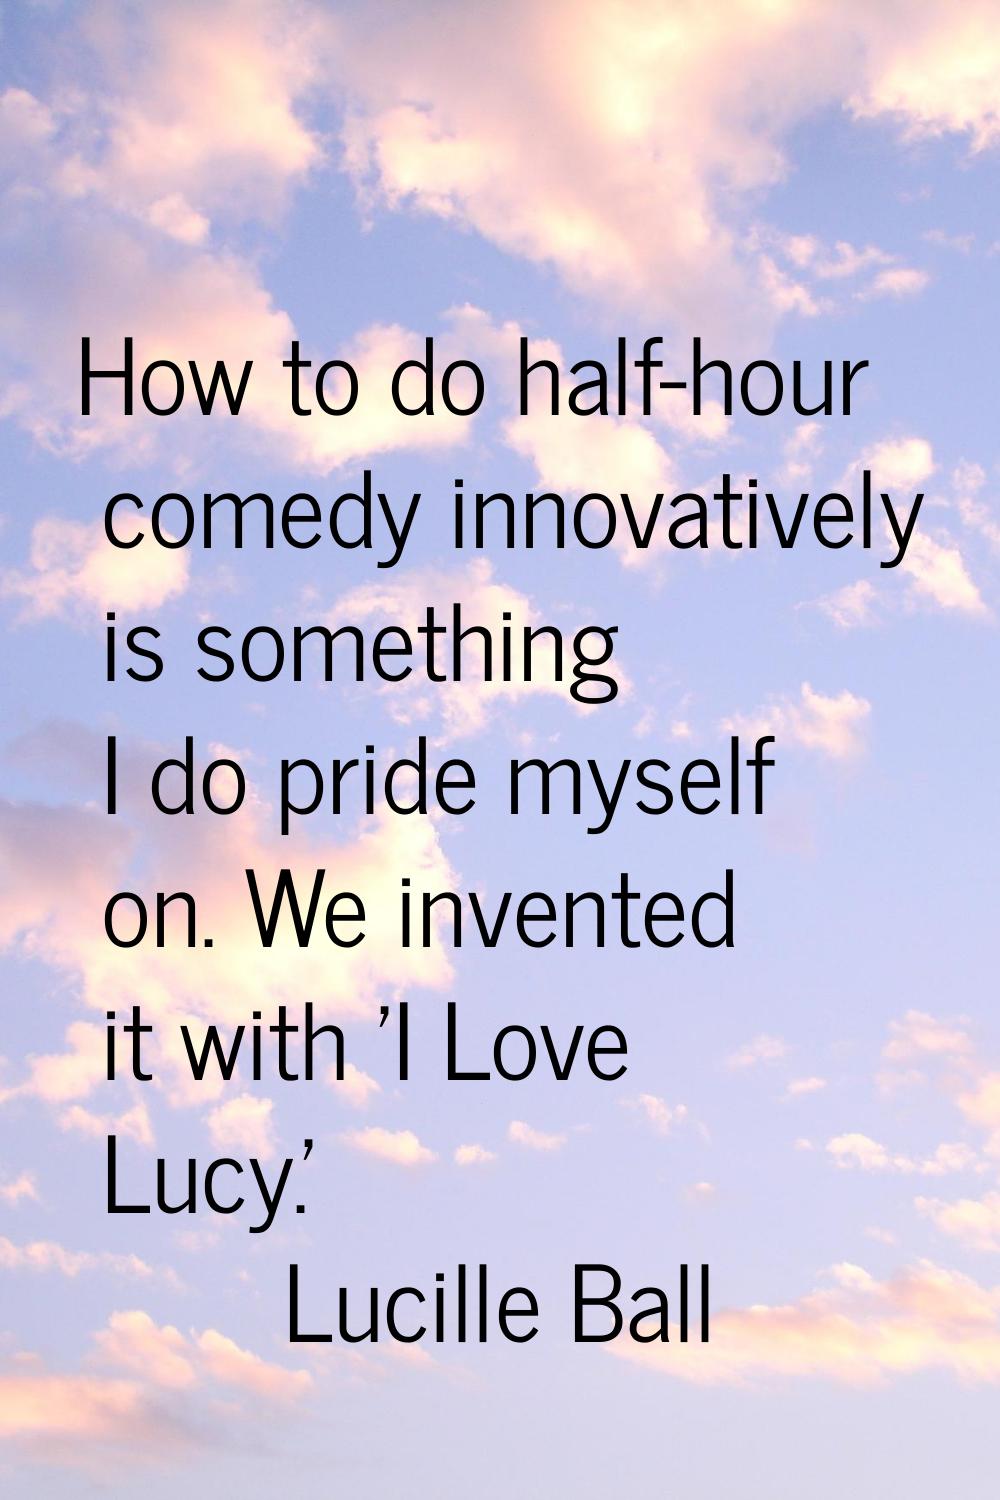 How to do half-hour comedy innovatively is something I do pride myself on. We invented it with 'I L